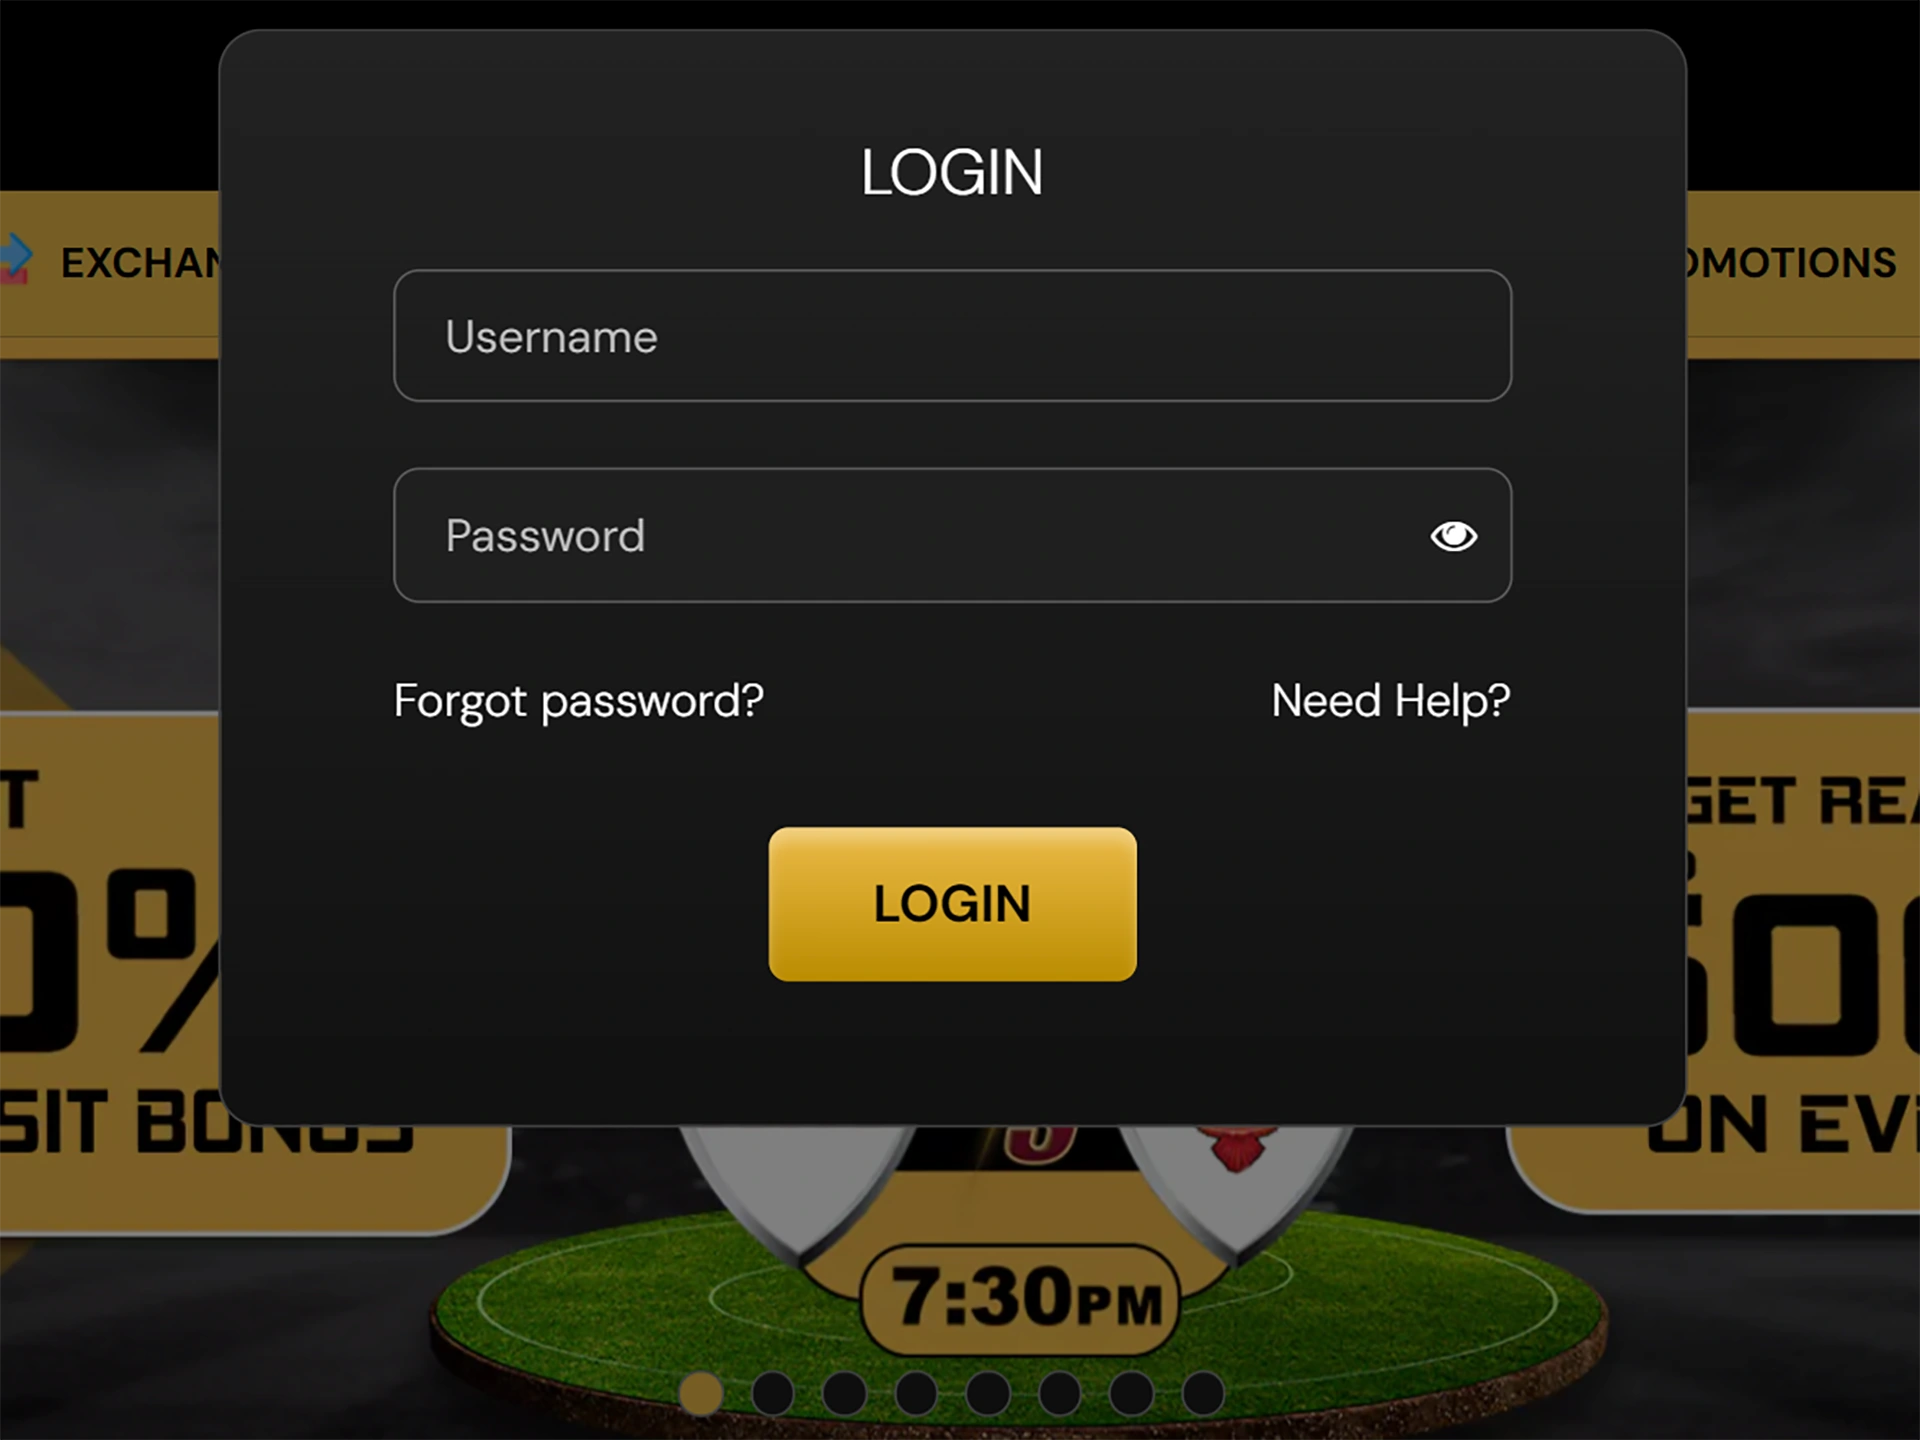 Enter your username and password to access your account and start playing at Satbet.